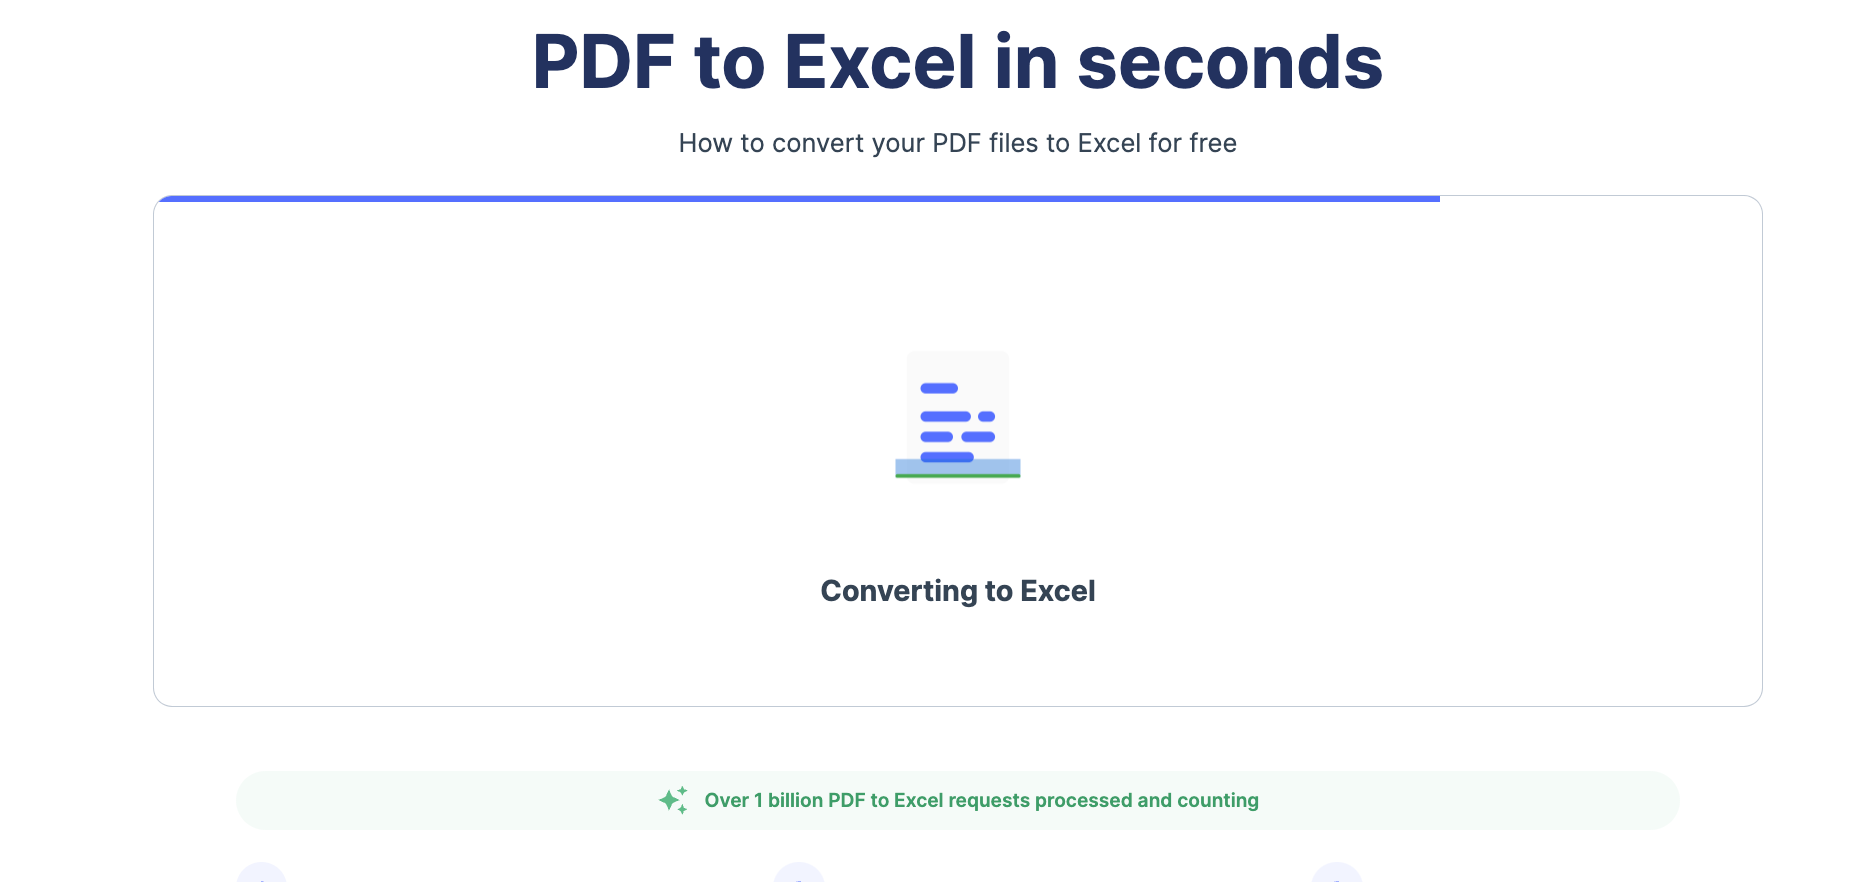 Click on Convert to Excel to start conversion